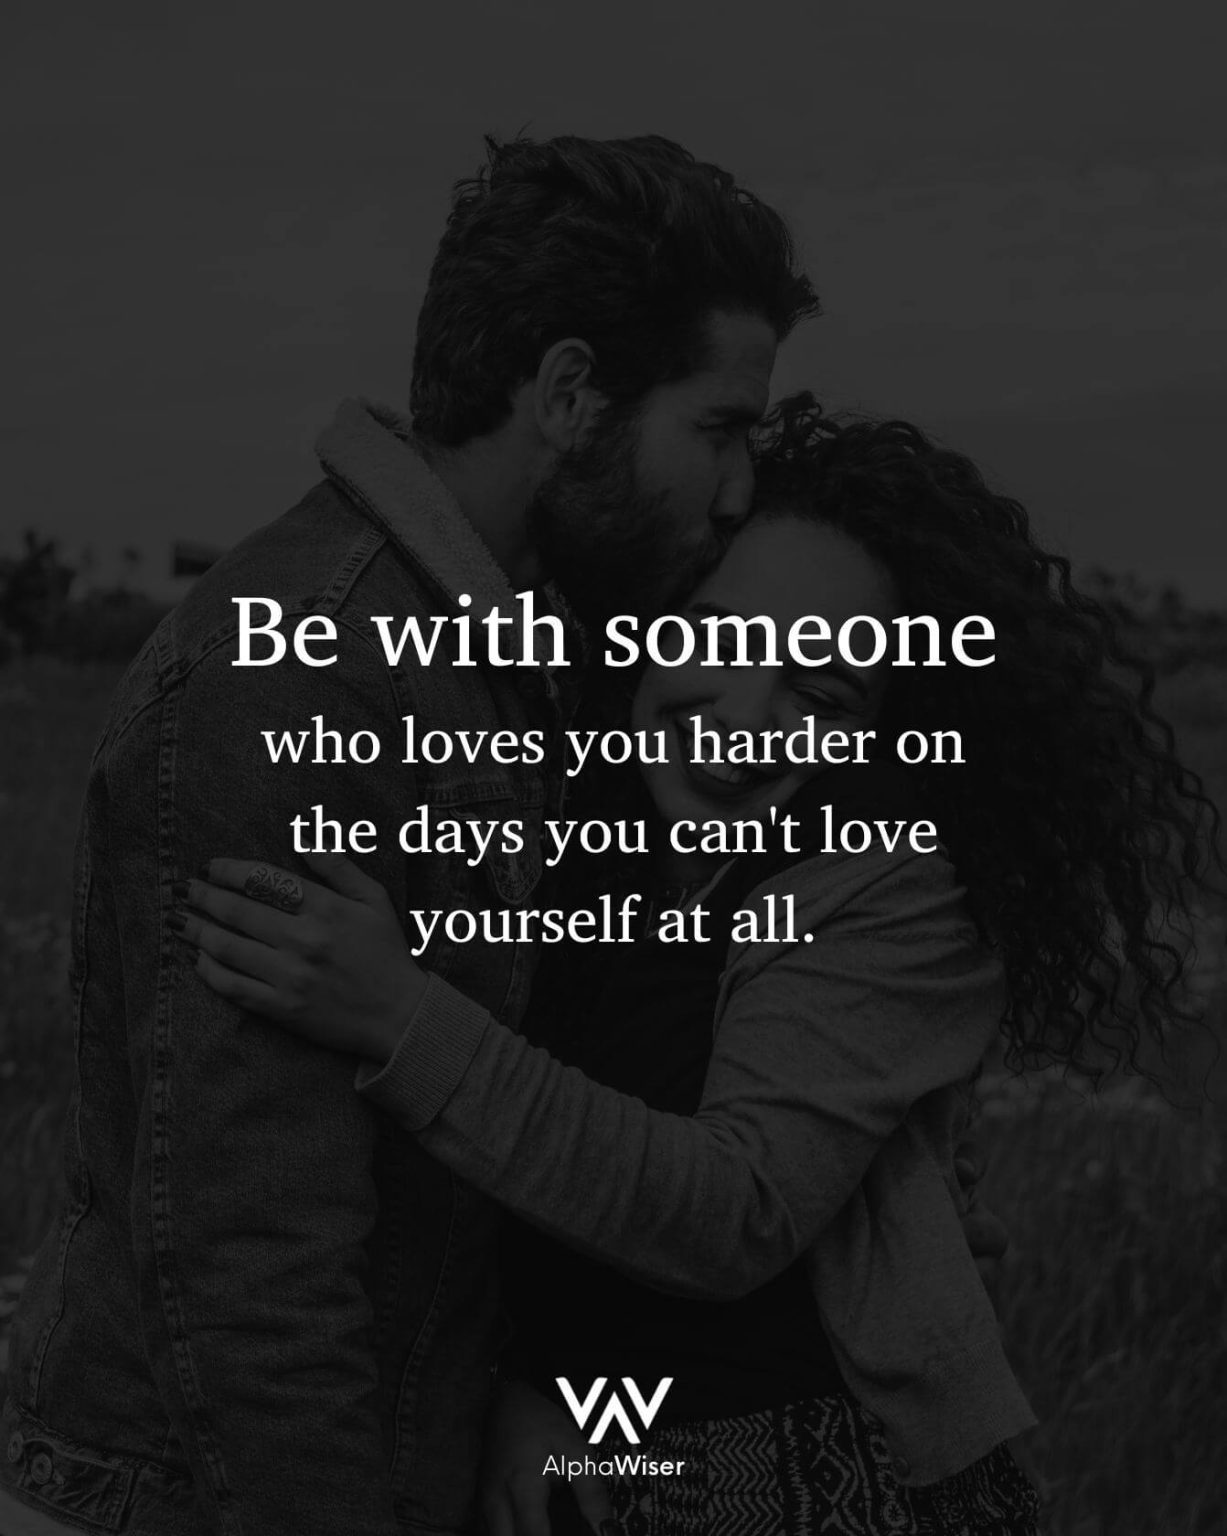 Meaningful Relationship Quotes That'll Give You All the True feel